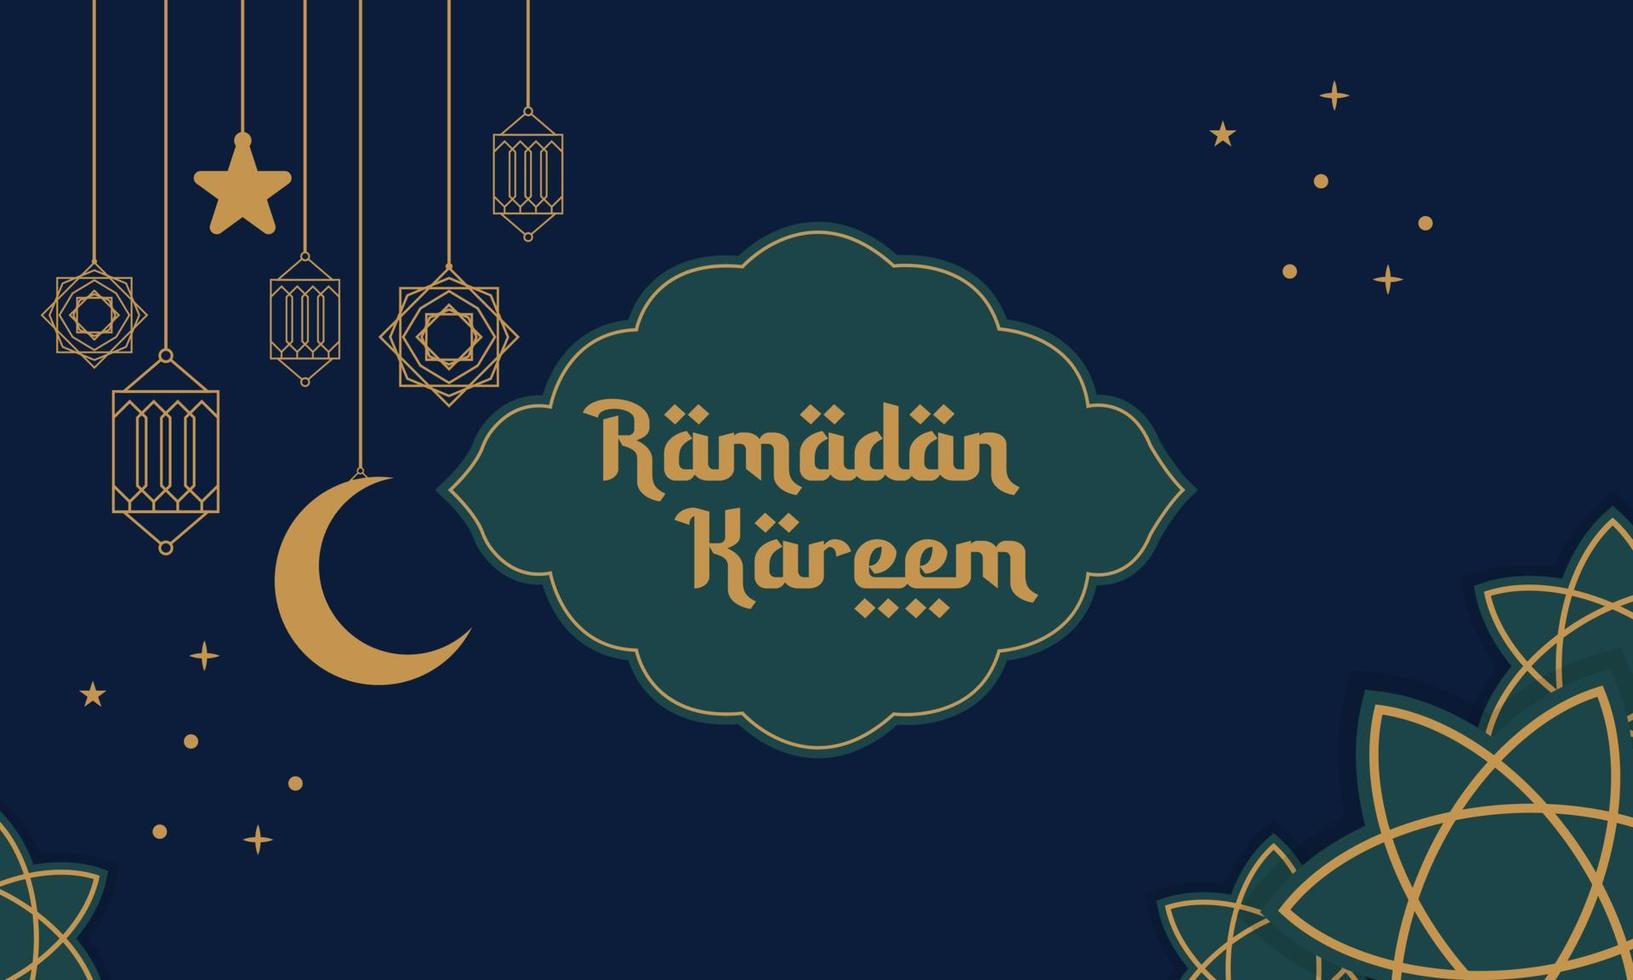 Kareem Ramadan. With arabic calligraphy and adornment, this is an Islamic background design. vector